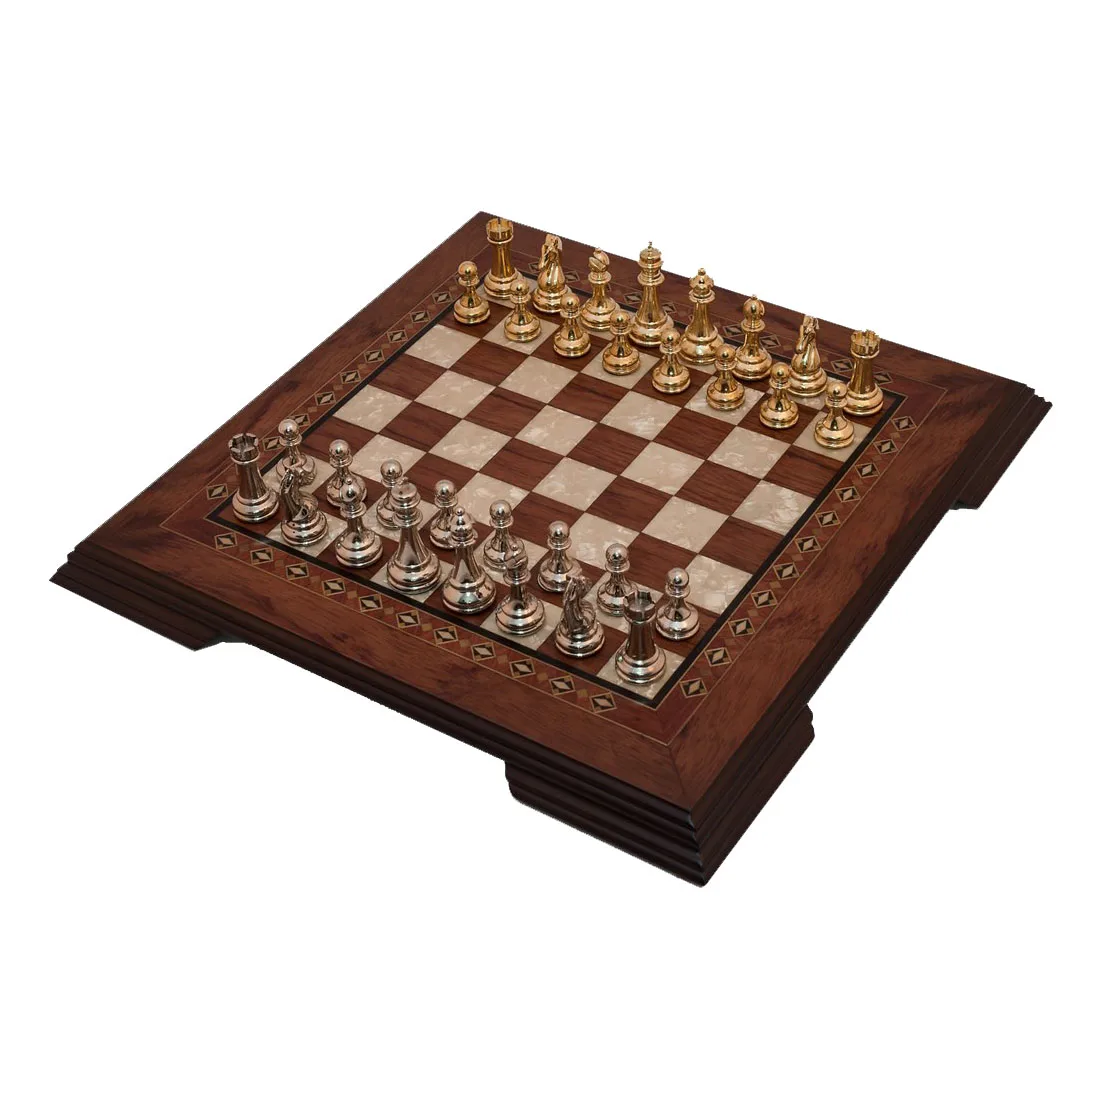 Solid Walnut Wood Chess Game Set - With Metal Figure - Footed Mosaic Engraved Chessboard Gift Items Шахматы осада или шахматы со смертью